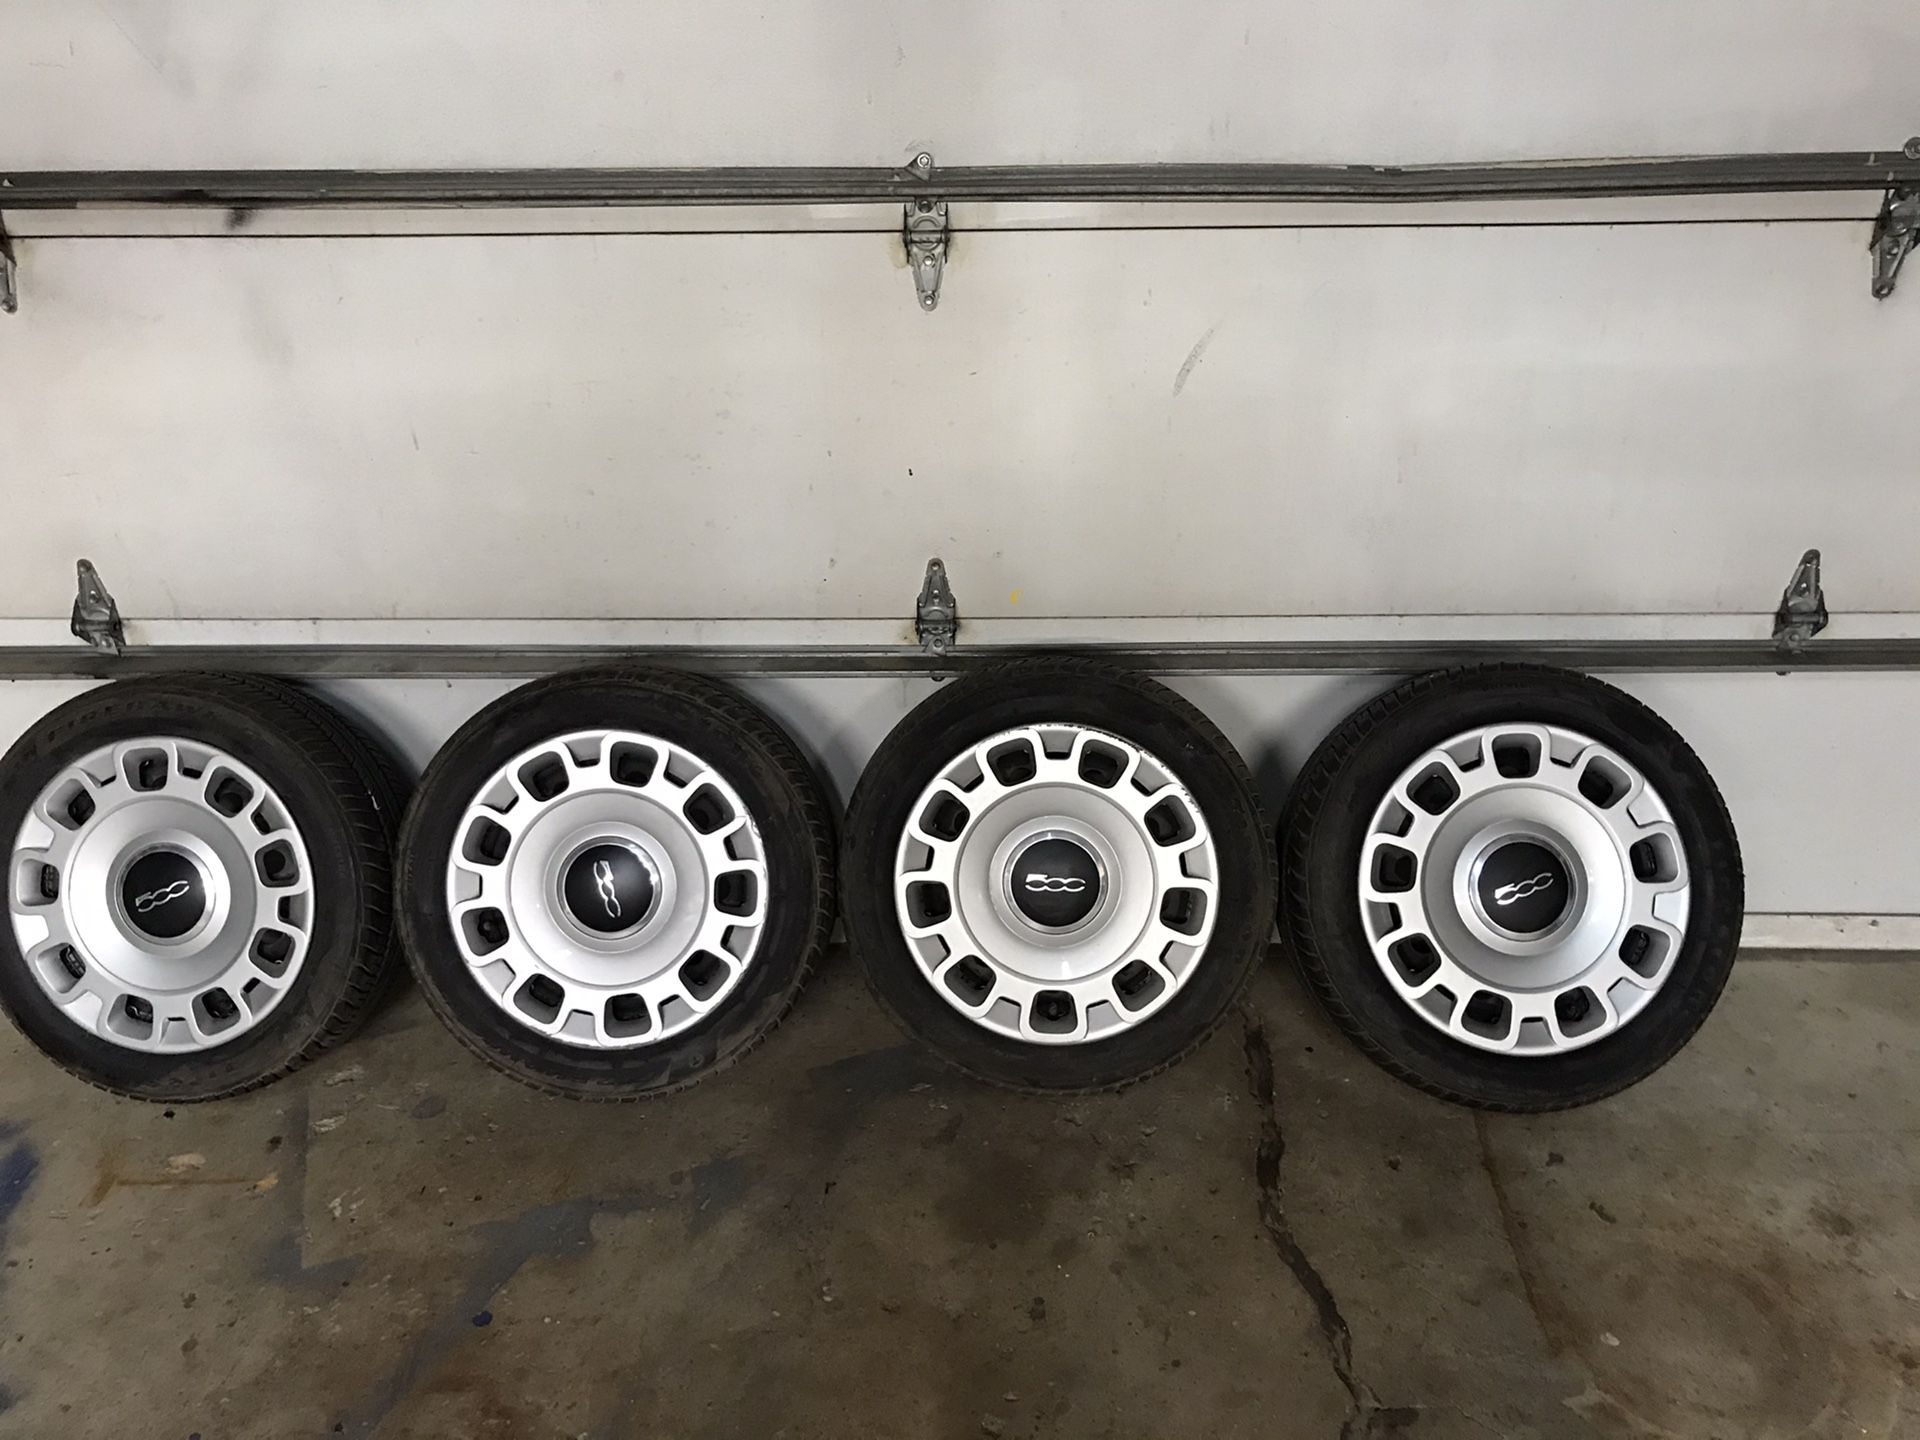 Fiat steel wheels with tires and hub caps. 185/55r15